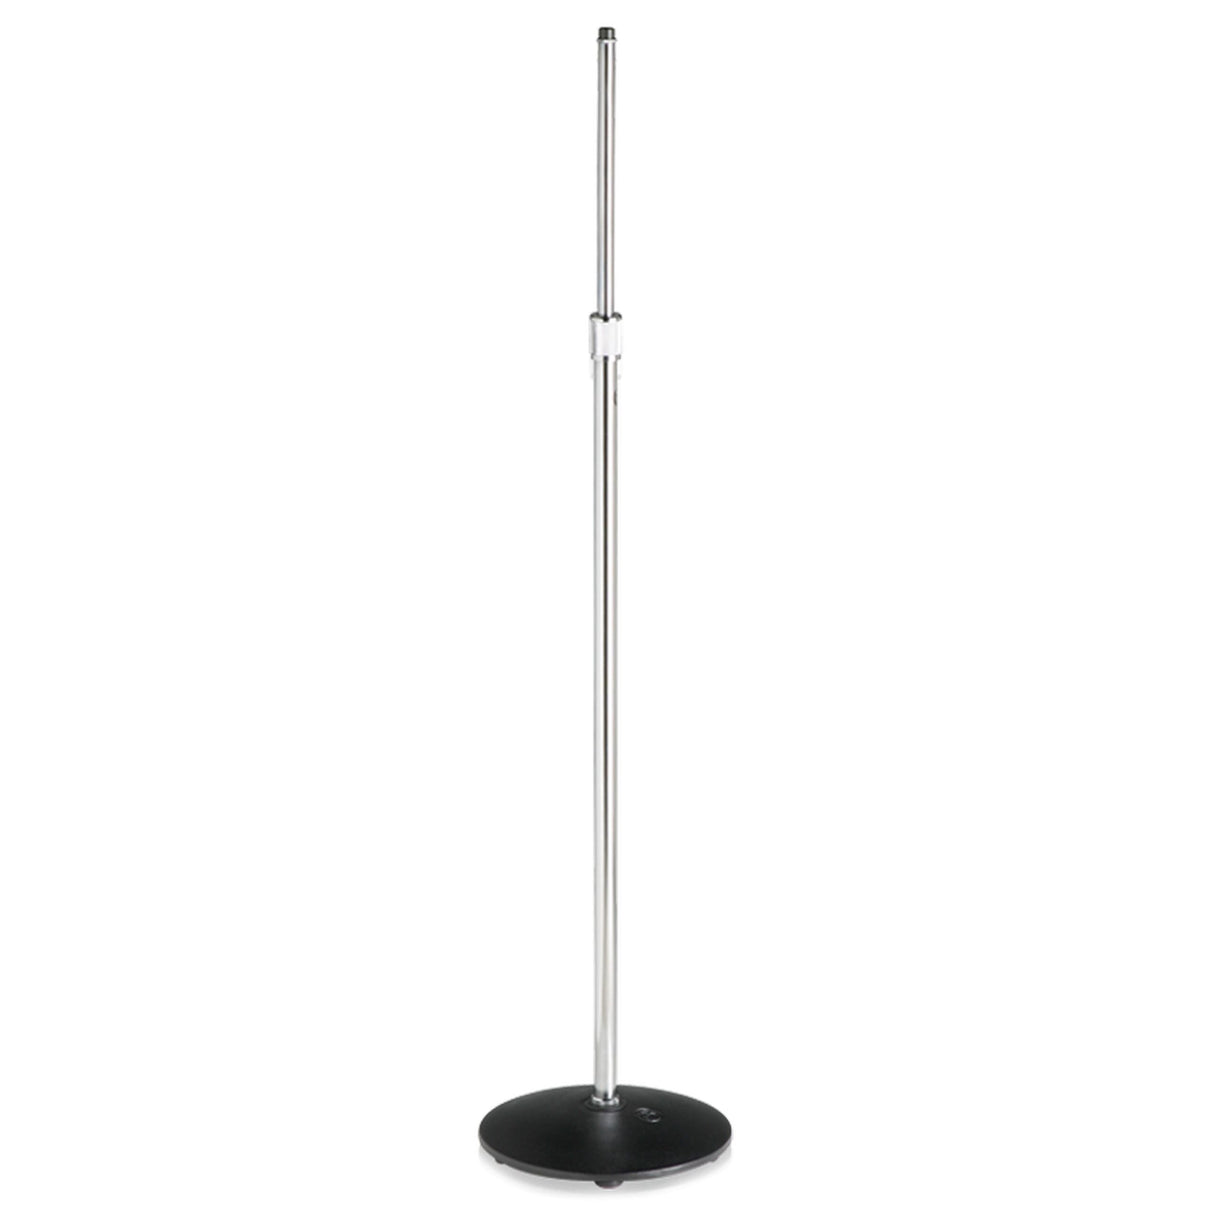 Atlas Sound MS-12C Low-Profile Microphone Stand, Chrome (Used)